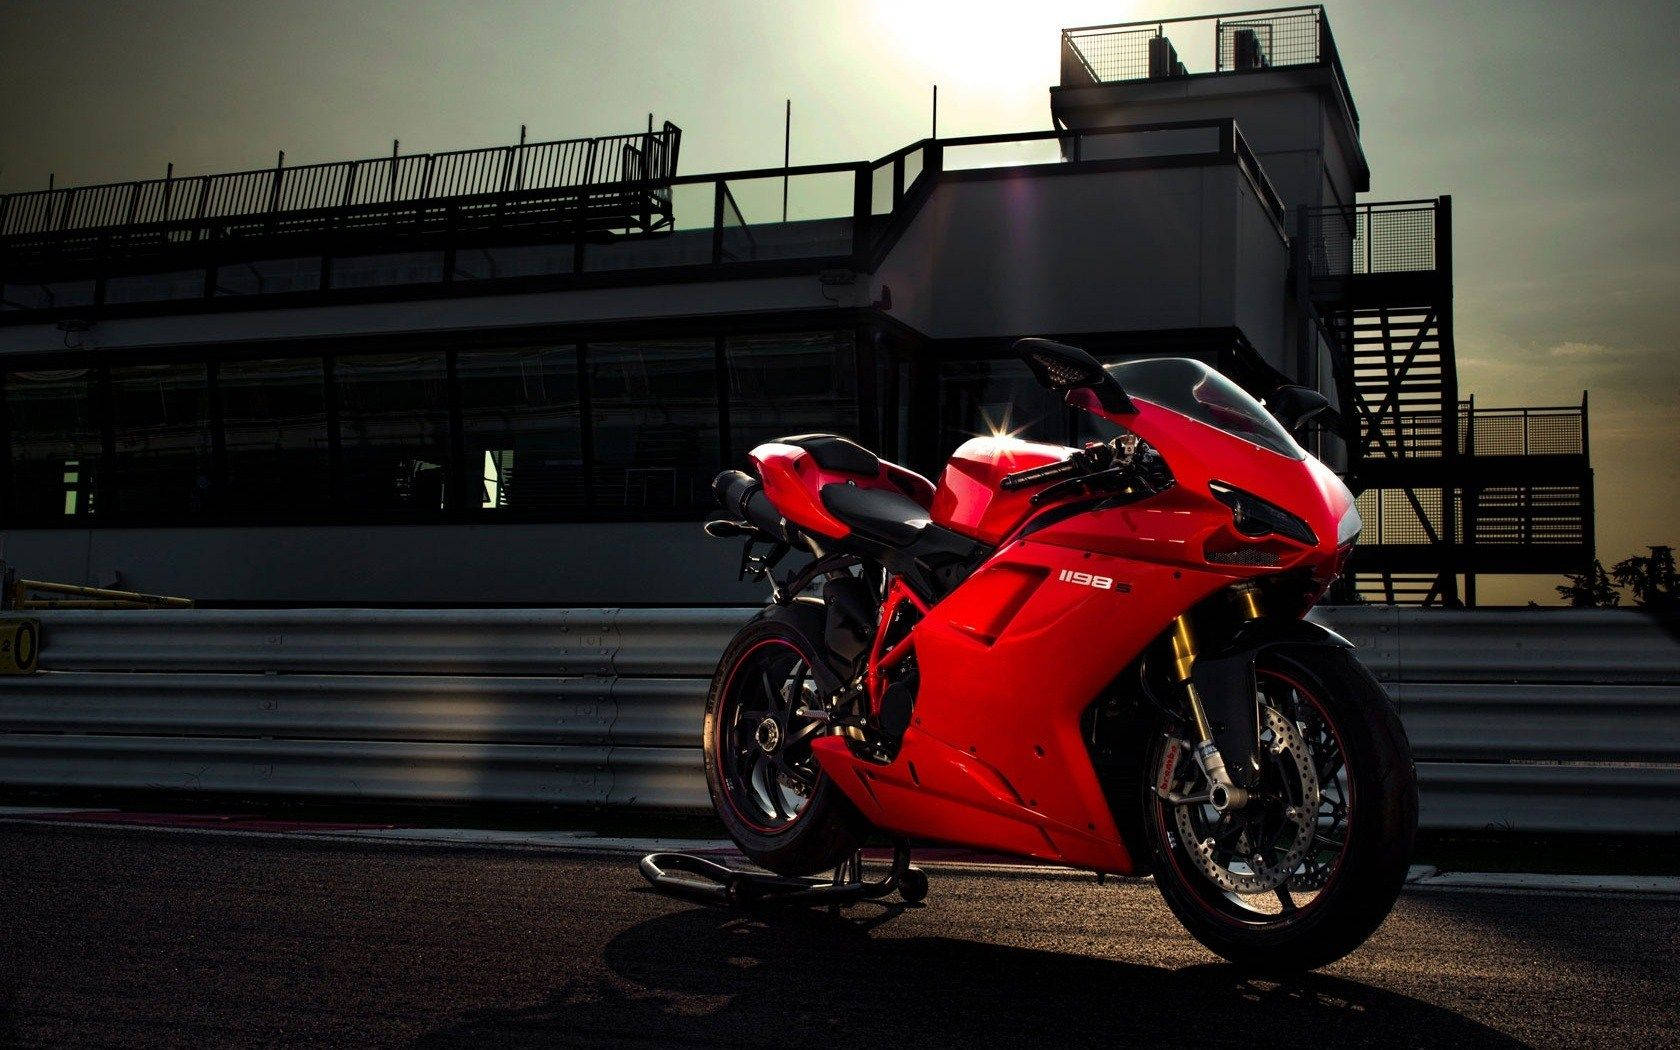 Ducati 1198s Motorcycle Background